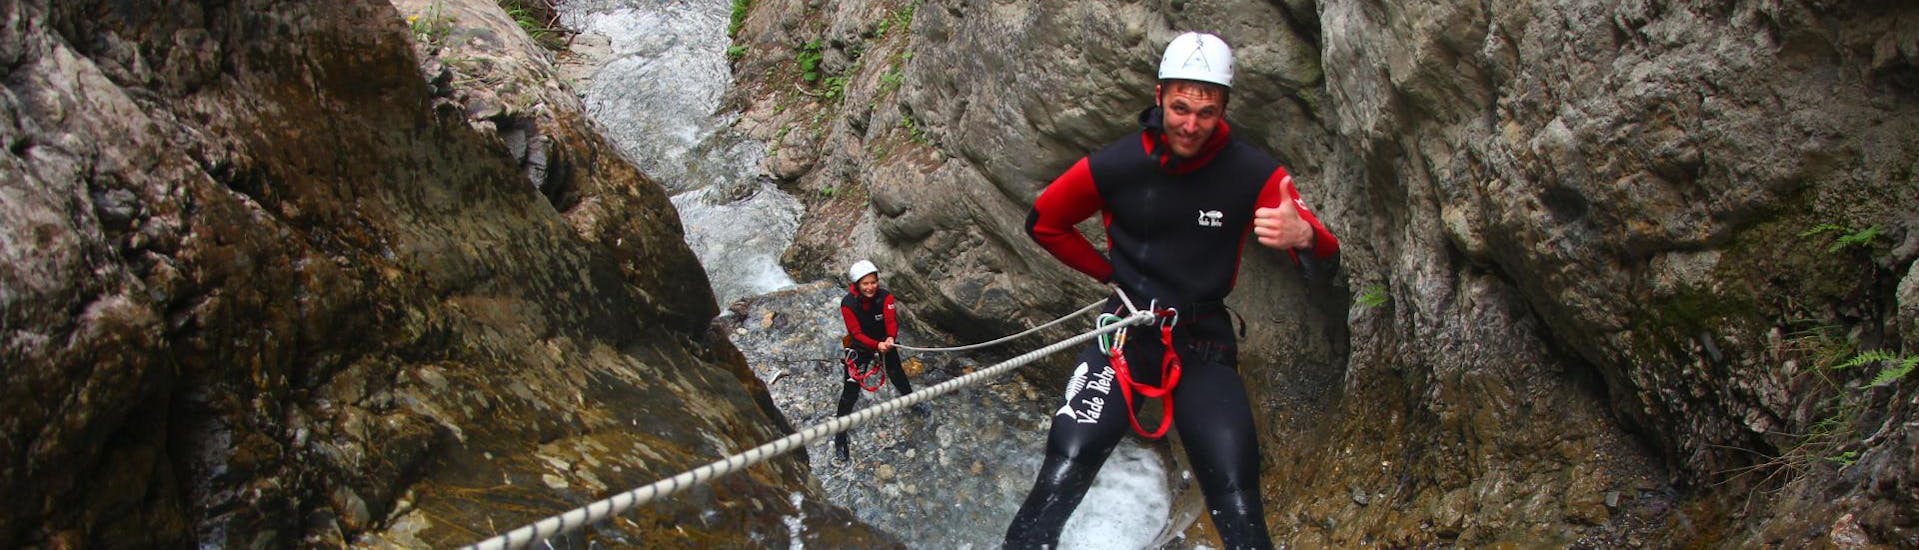 Canyoning di media difficoltà a Pfunds - Tschingelsbach.